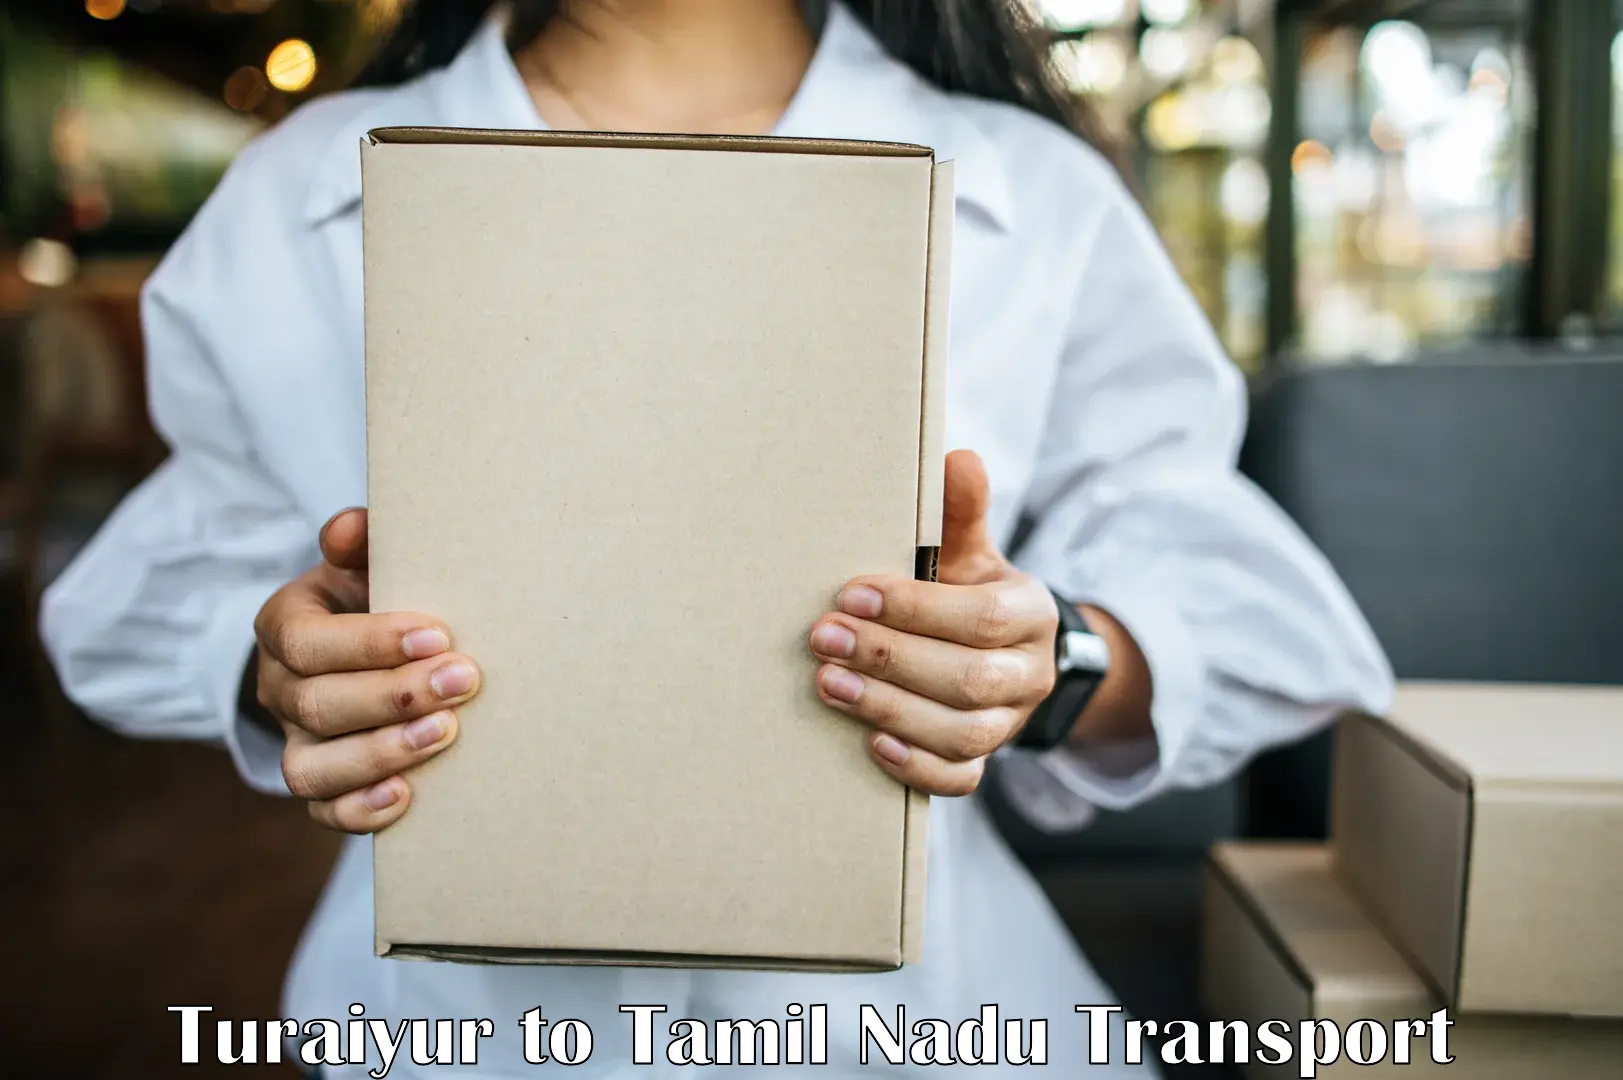 Goods delivery service Turaiyur to Tamil Nadu